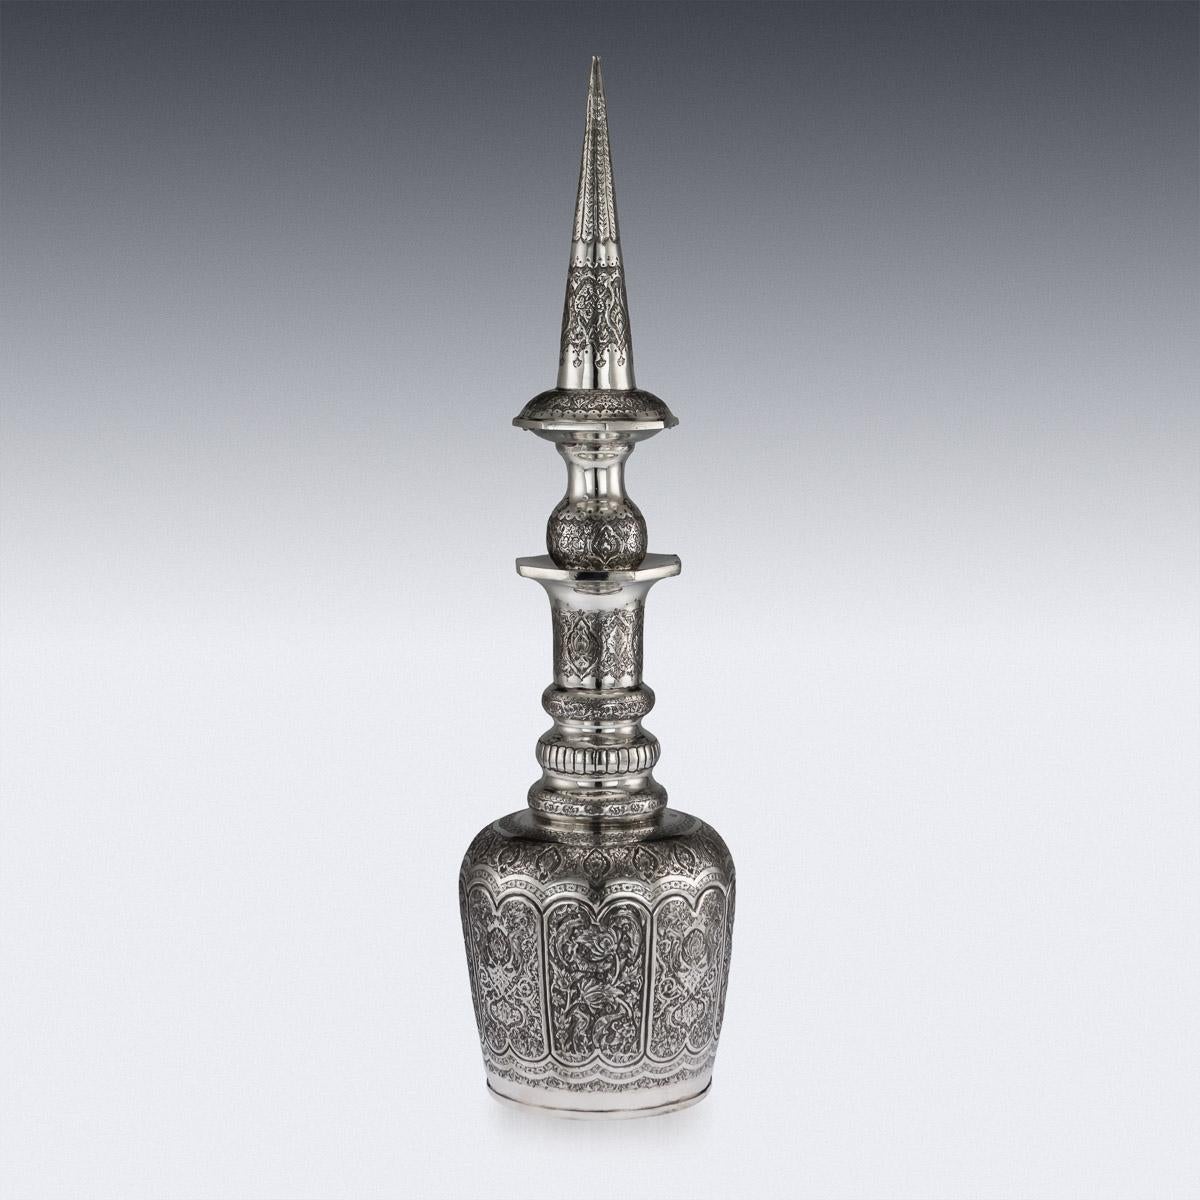 Stunning mid-20th century Persian solid silver massive decanter and stopper, of traditional form, beautifully decorated with detailed decorations typical to the region of Isfahan. Unmarked, tested (900+ silver standard).
 